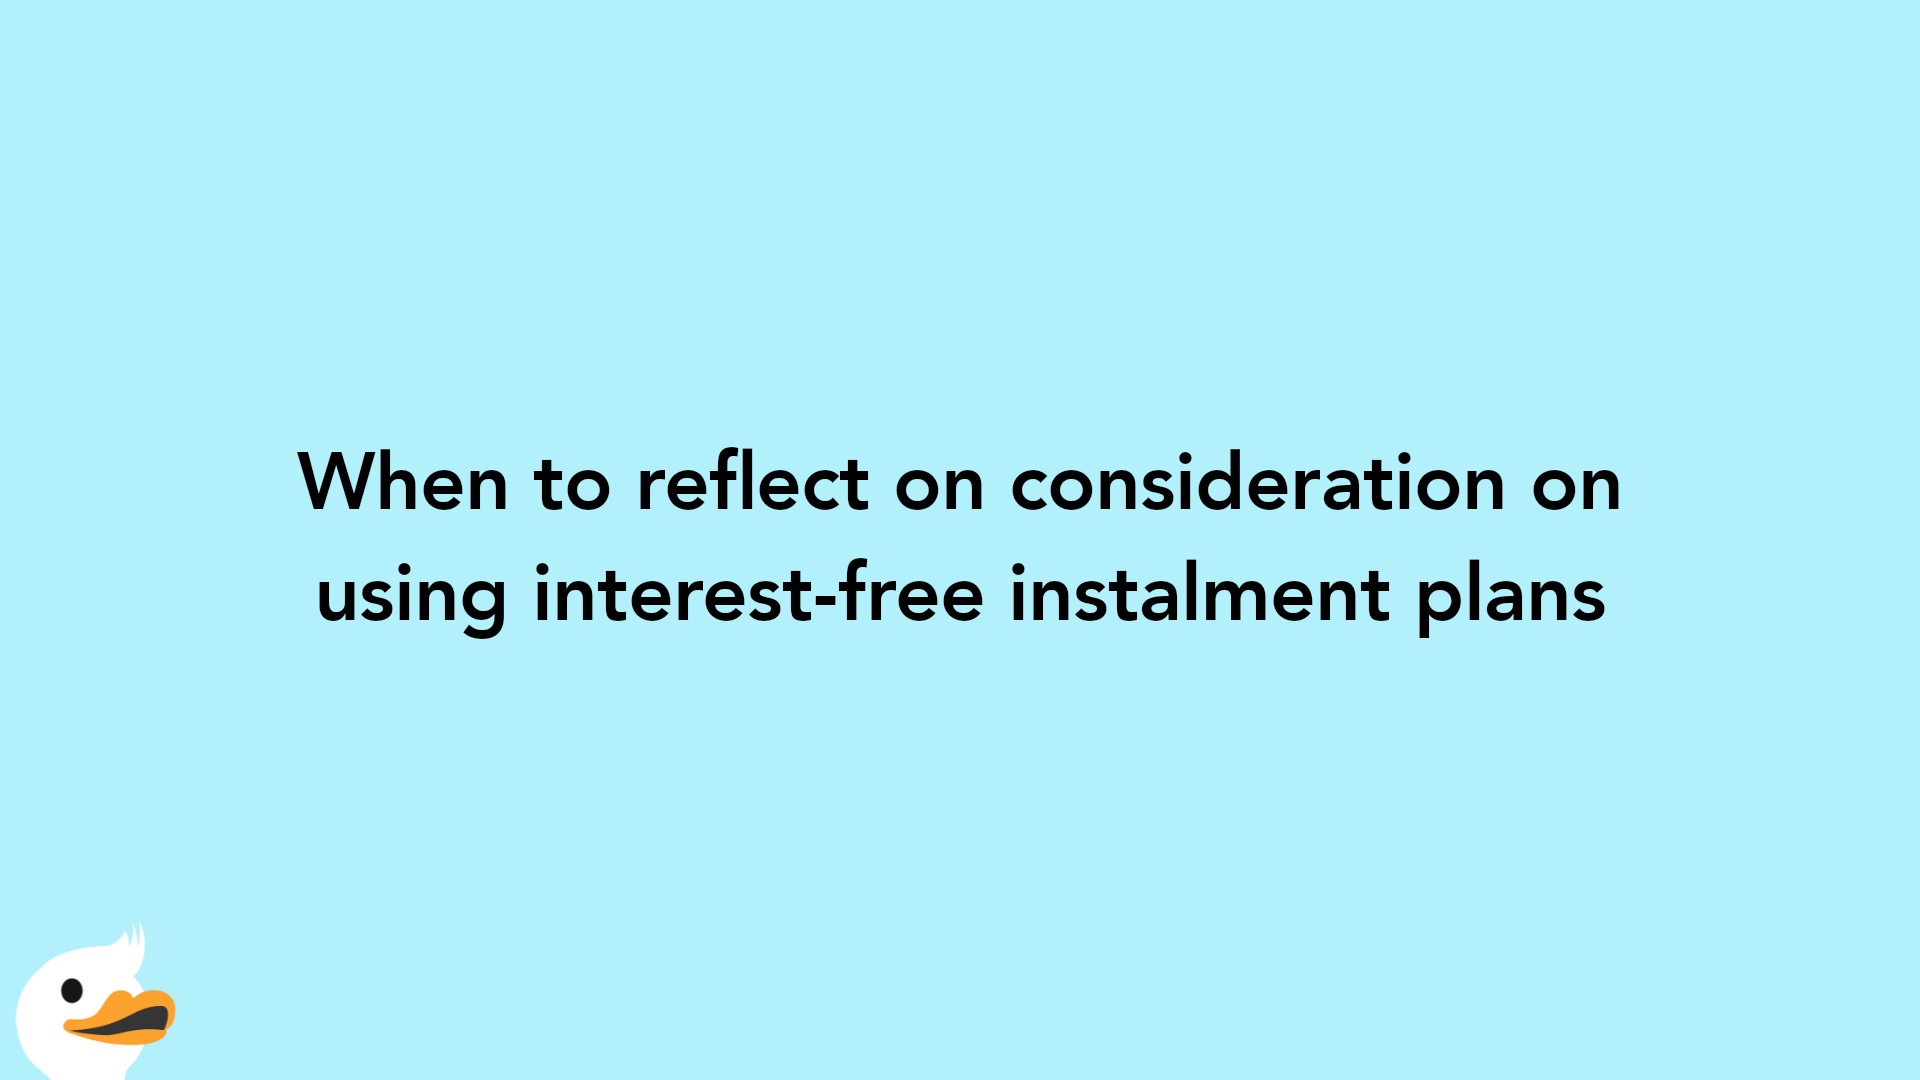 When to reflect on consideration on using interest-free instalment plans